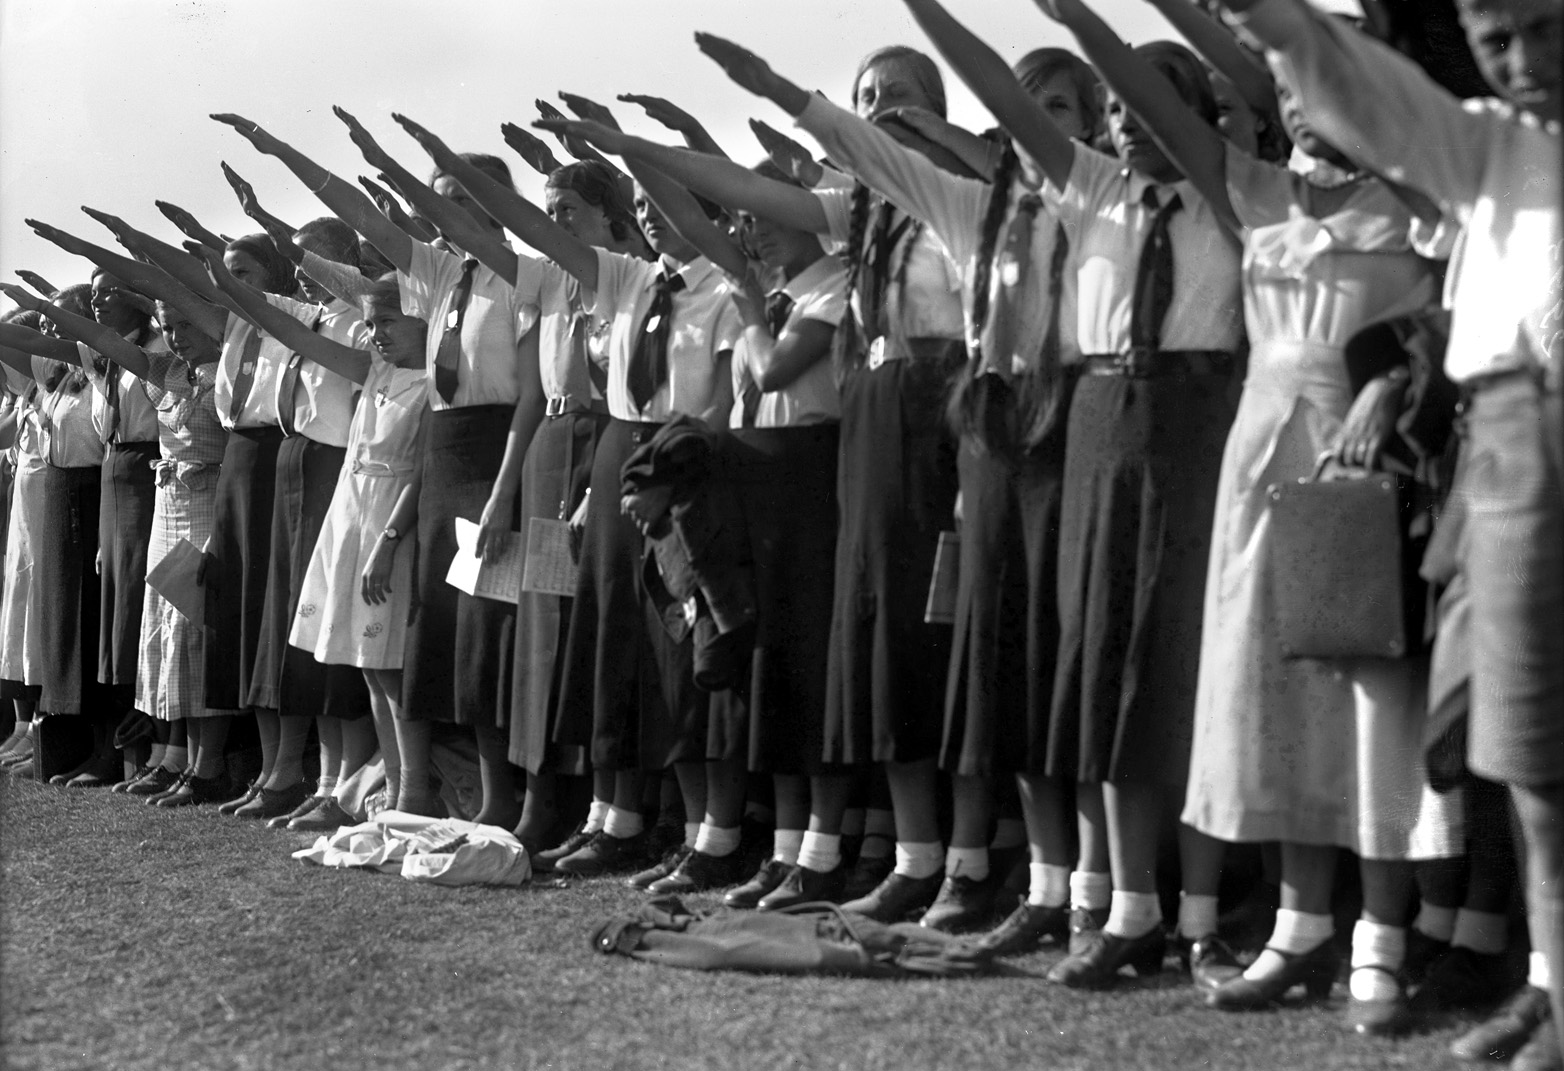 Young German women, inculcated with Nazi ideology and inducted as members of the League of German Girls, were encouraged to have babies who would one day serve the Third Reich. 